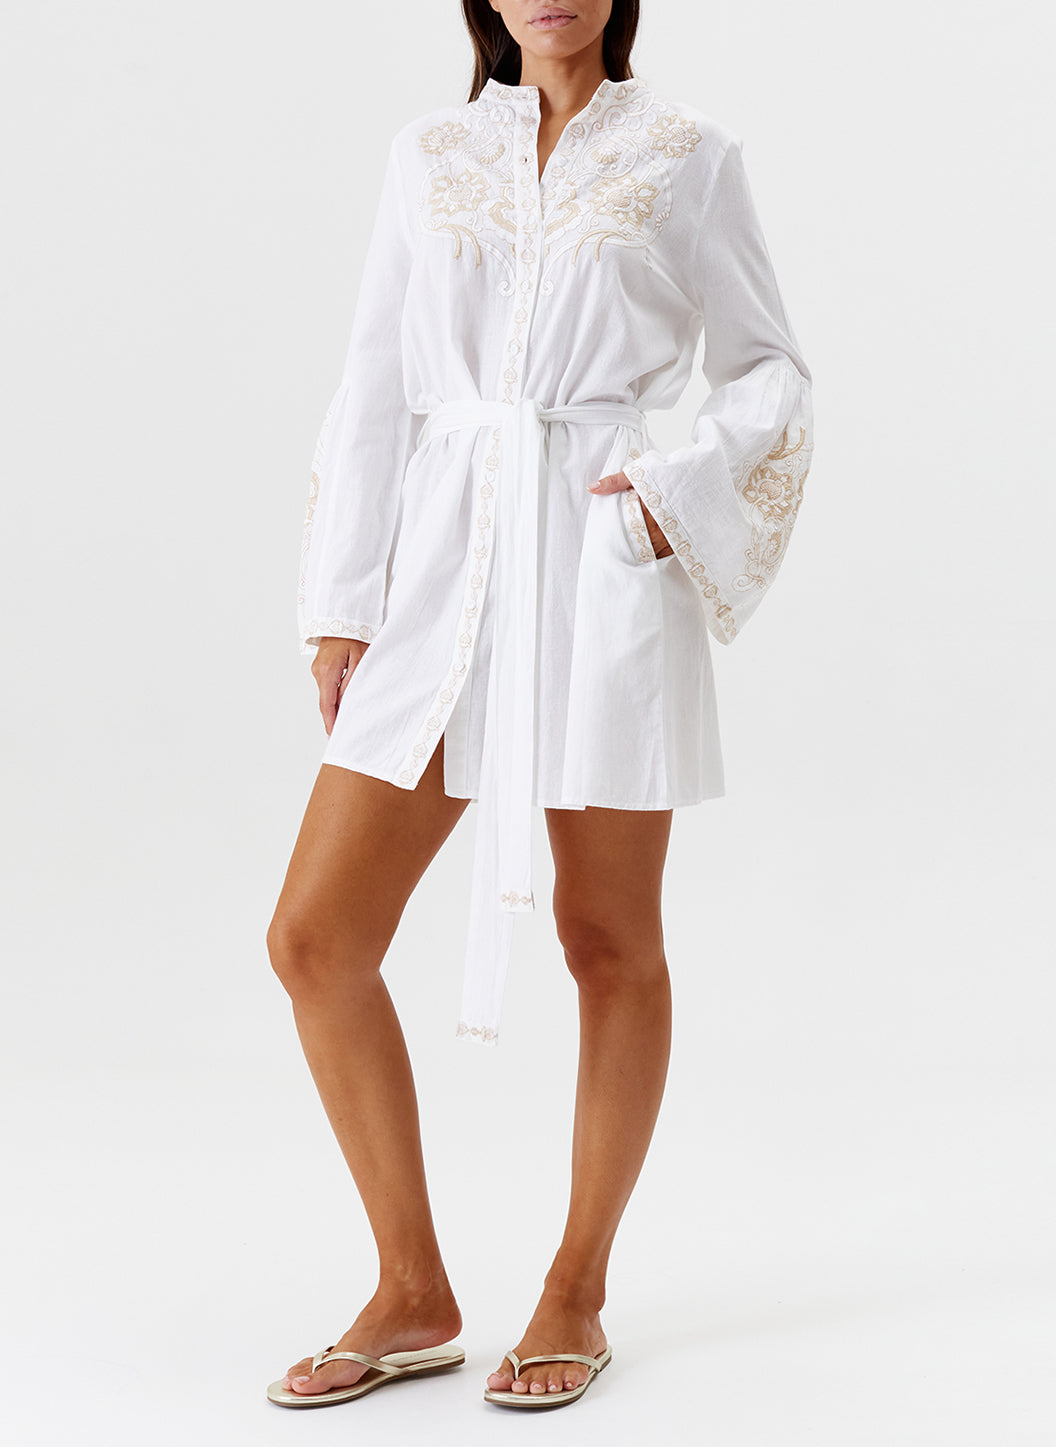 Melissa Odabash Everly White/Tan Embroidered Short Kaftan - 2024 Collection